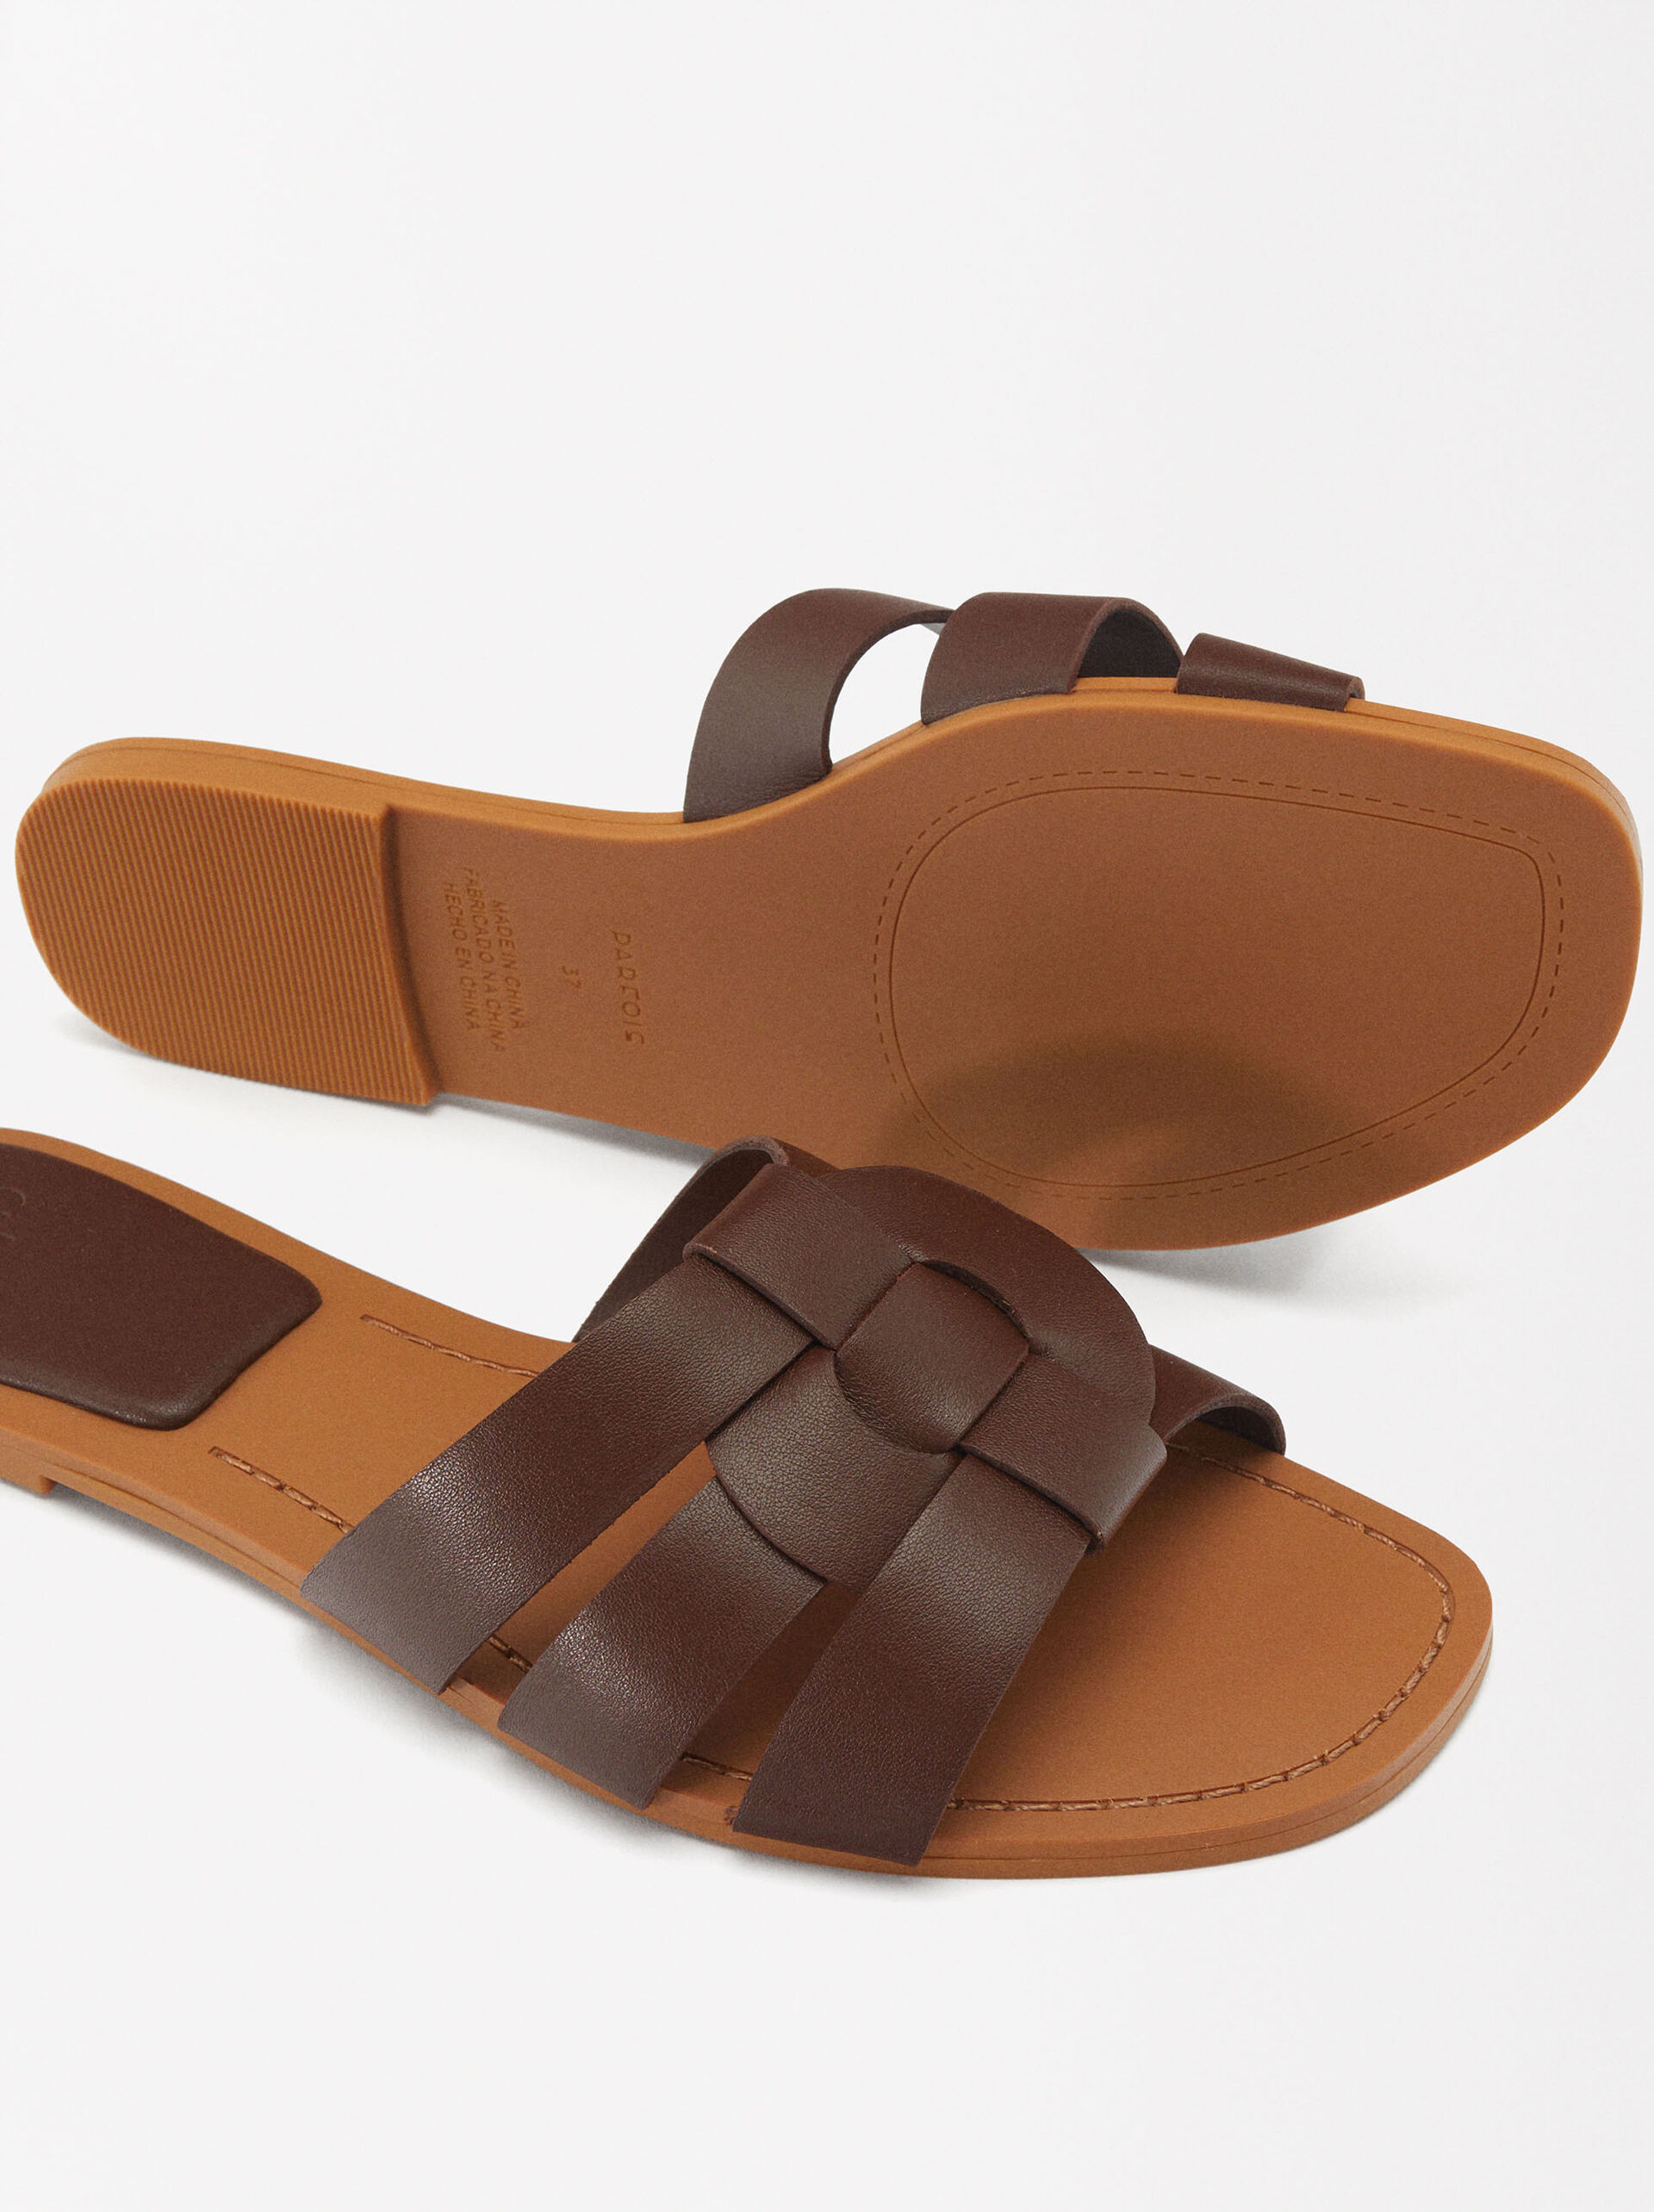 Leather Flat Sandals image number 4.0